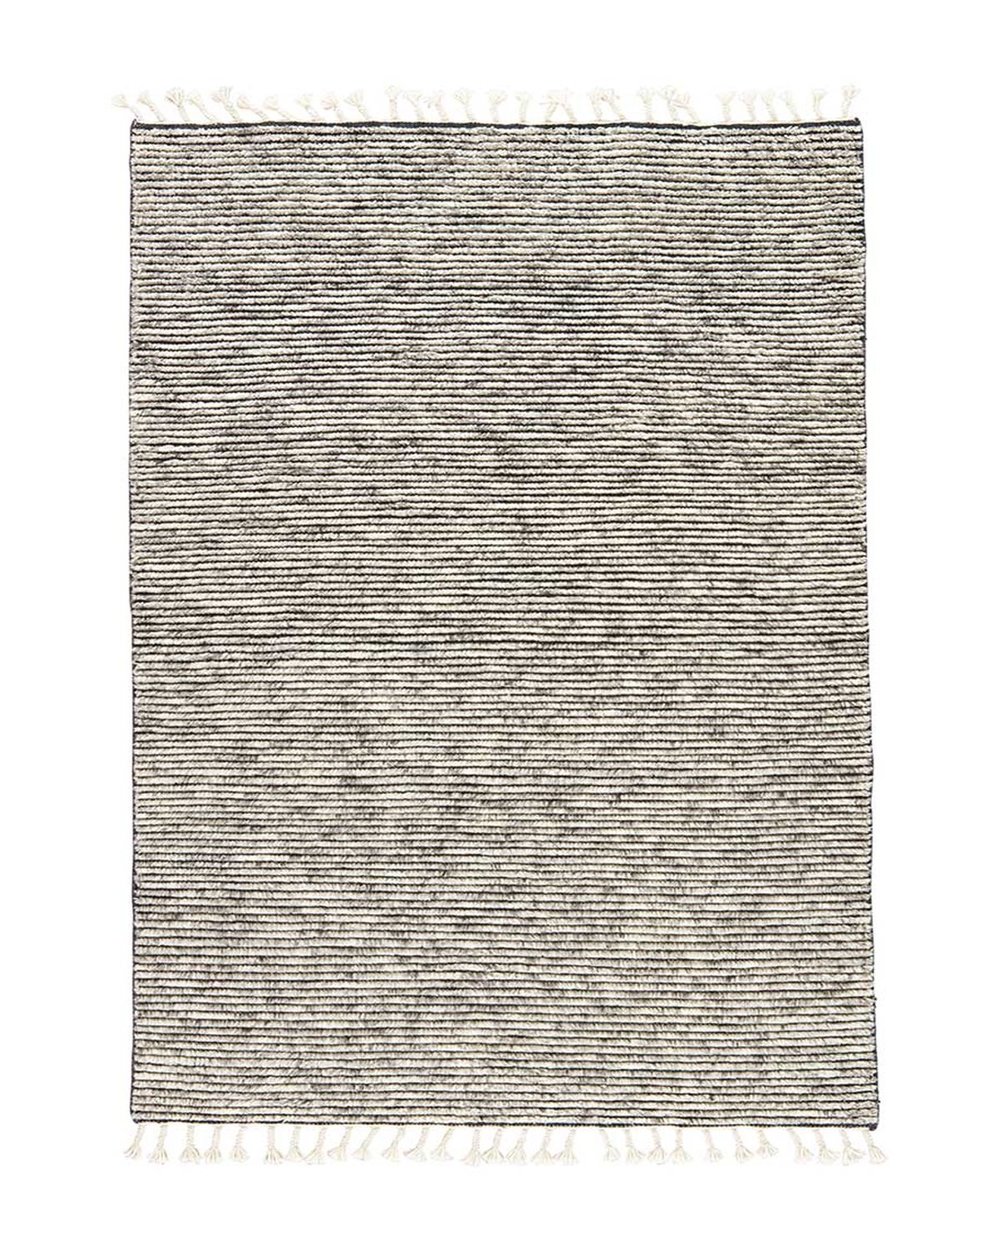 Buenos_Aires_Hand-Knotted_Wool_Rug_1.jpg